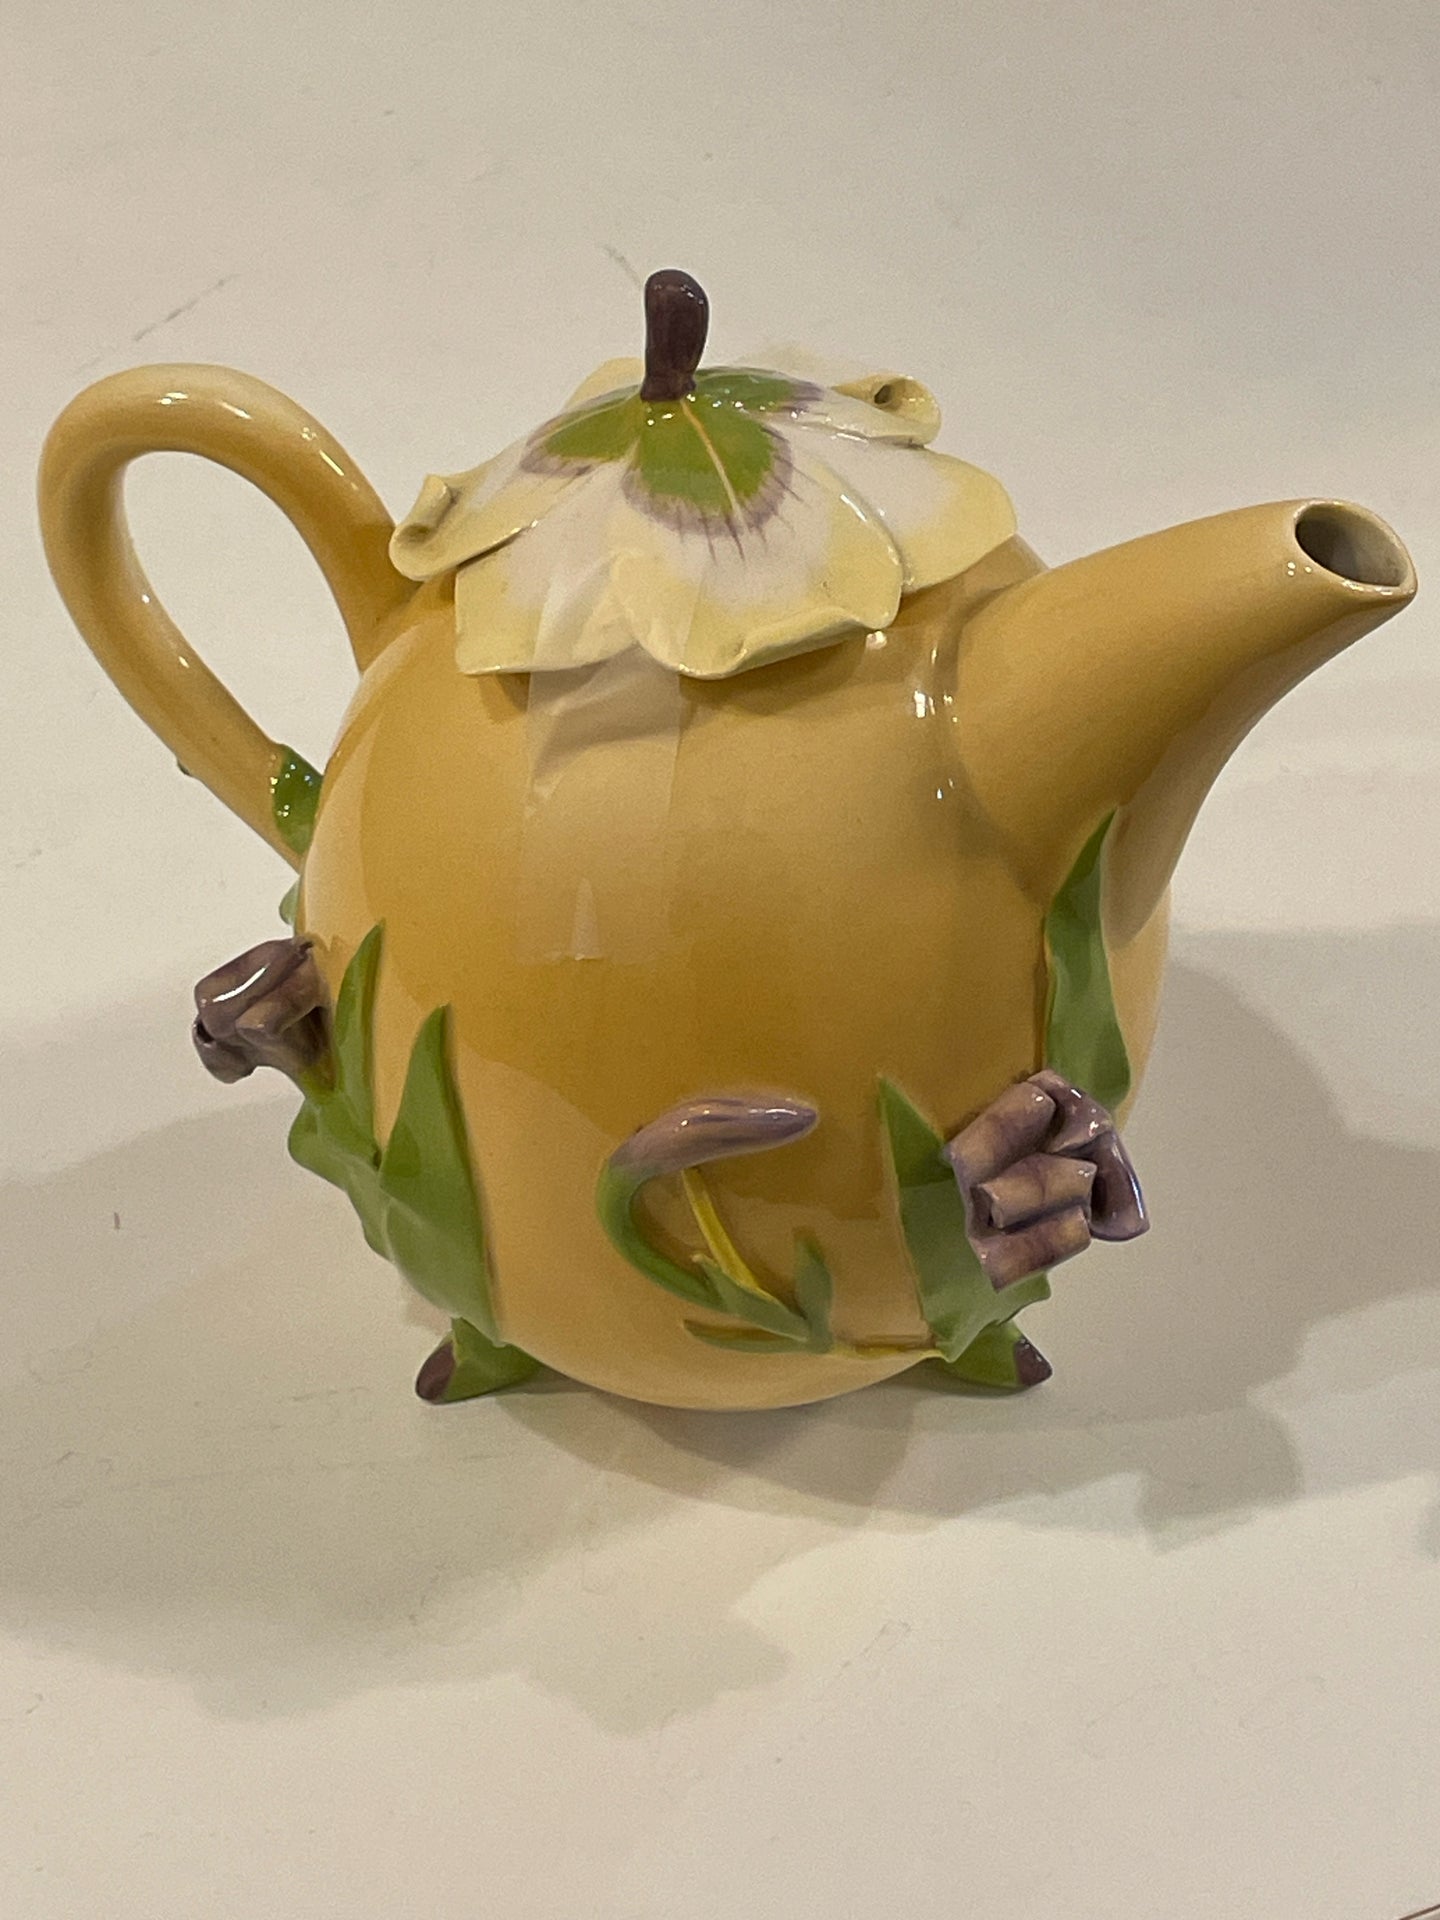 Floral Teapot from Mustardseed & Moonshine, made in South Africa